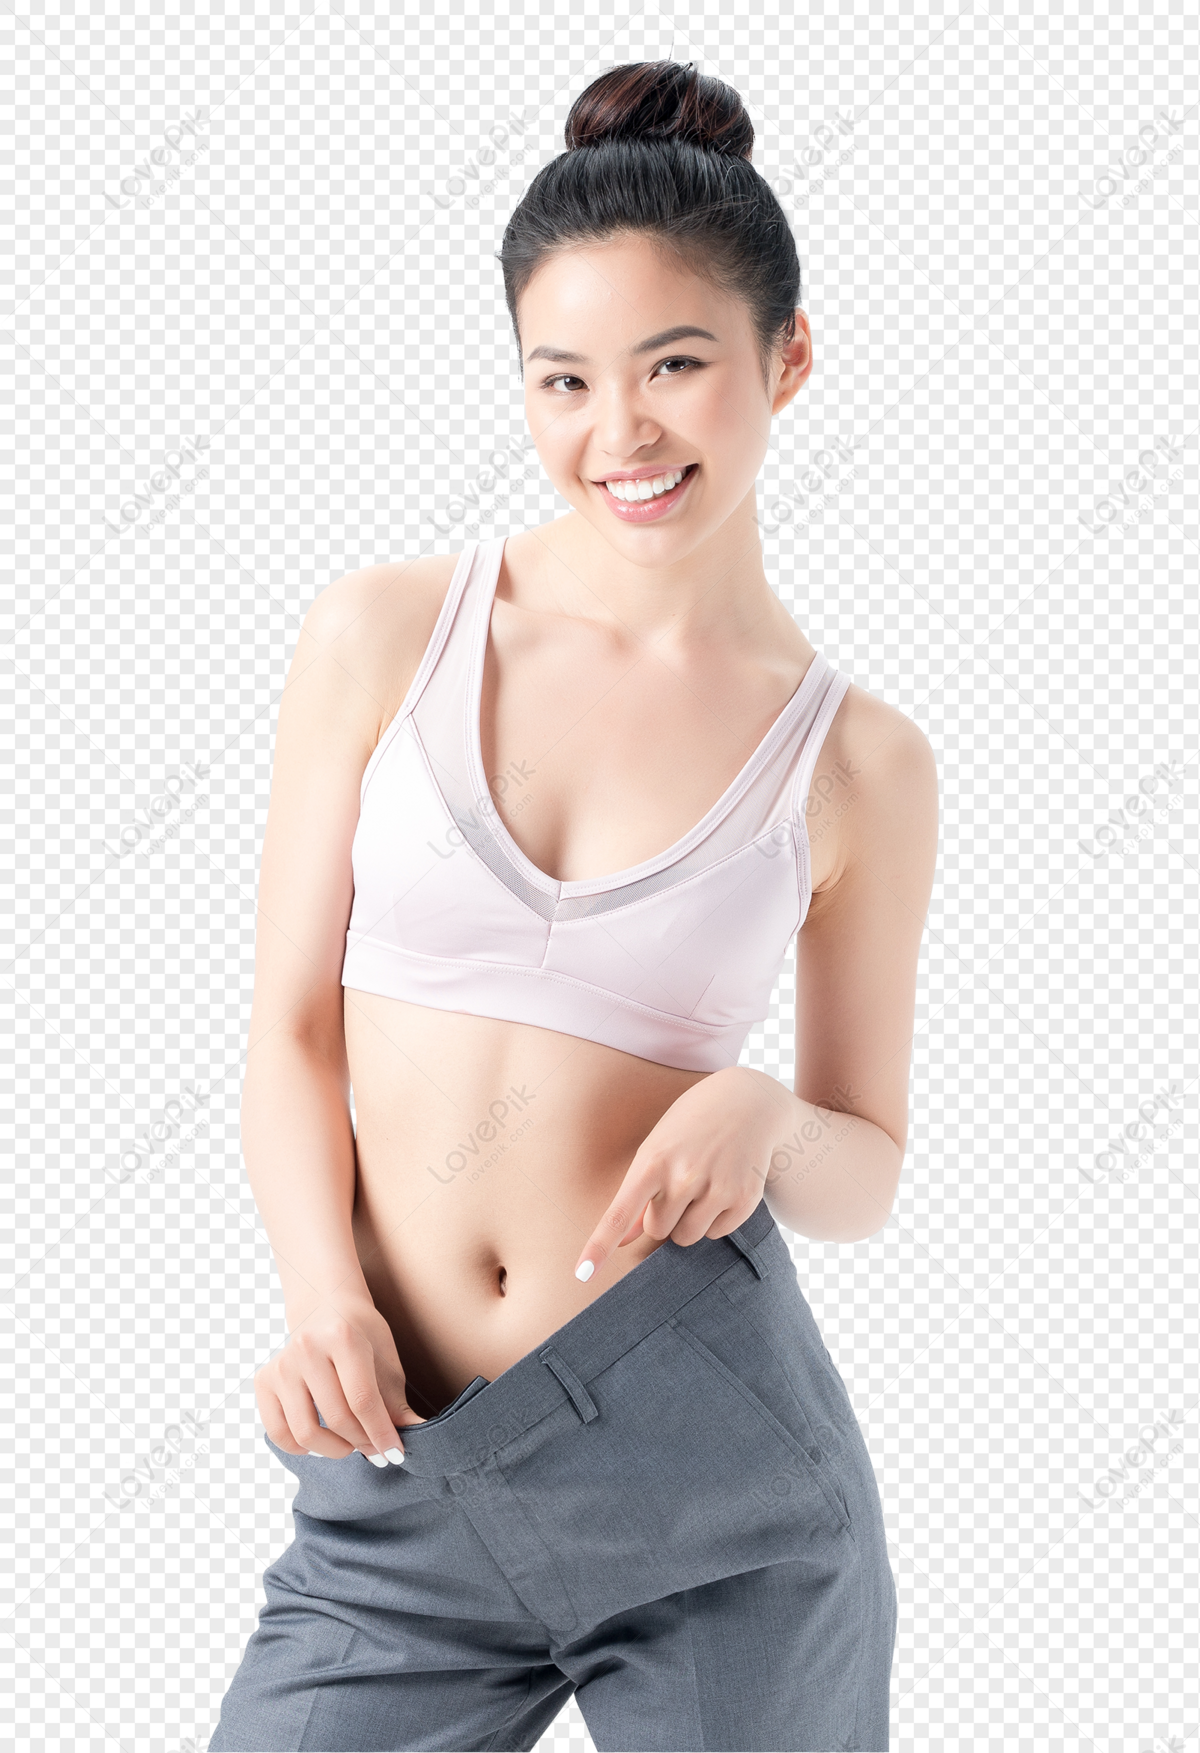 Woman Wears Too Big Trousers As she Loose Weight - Weightloss Stock Photo -  Image of jeans, loss: 107226474